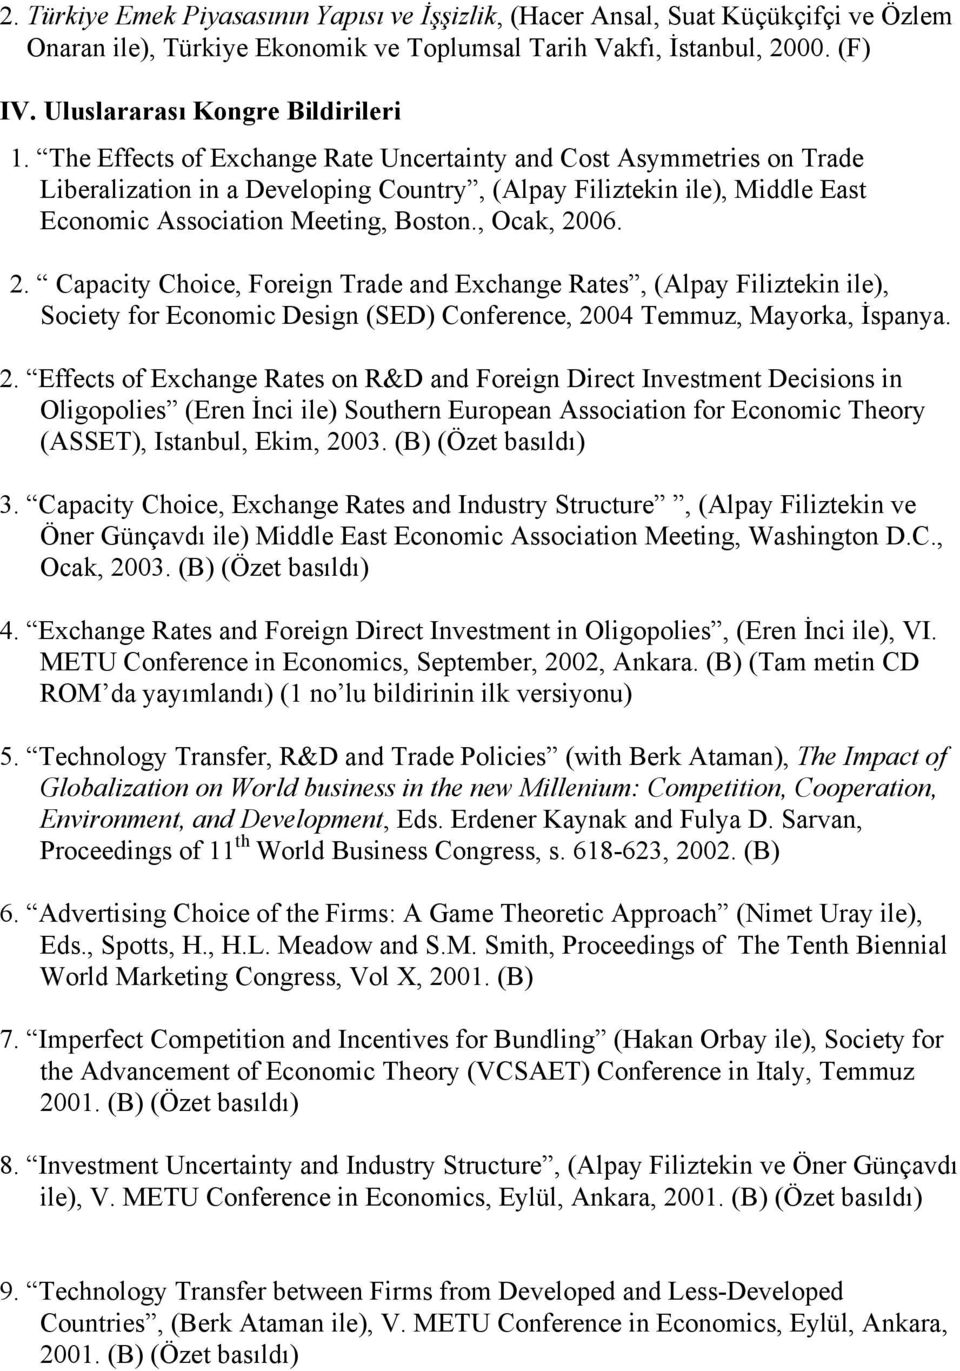 The Effects of Exchange Rate Uncertainty and Cost Asymmetries on Trade Liberalization in a Developing Country, (Alpay Filiztekin ile), Middle East Economic Association Meeting, Boston., Ocak, 20